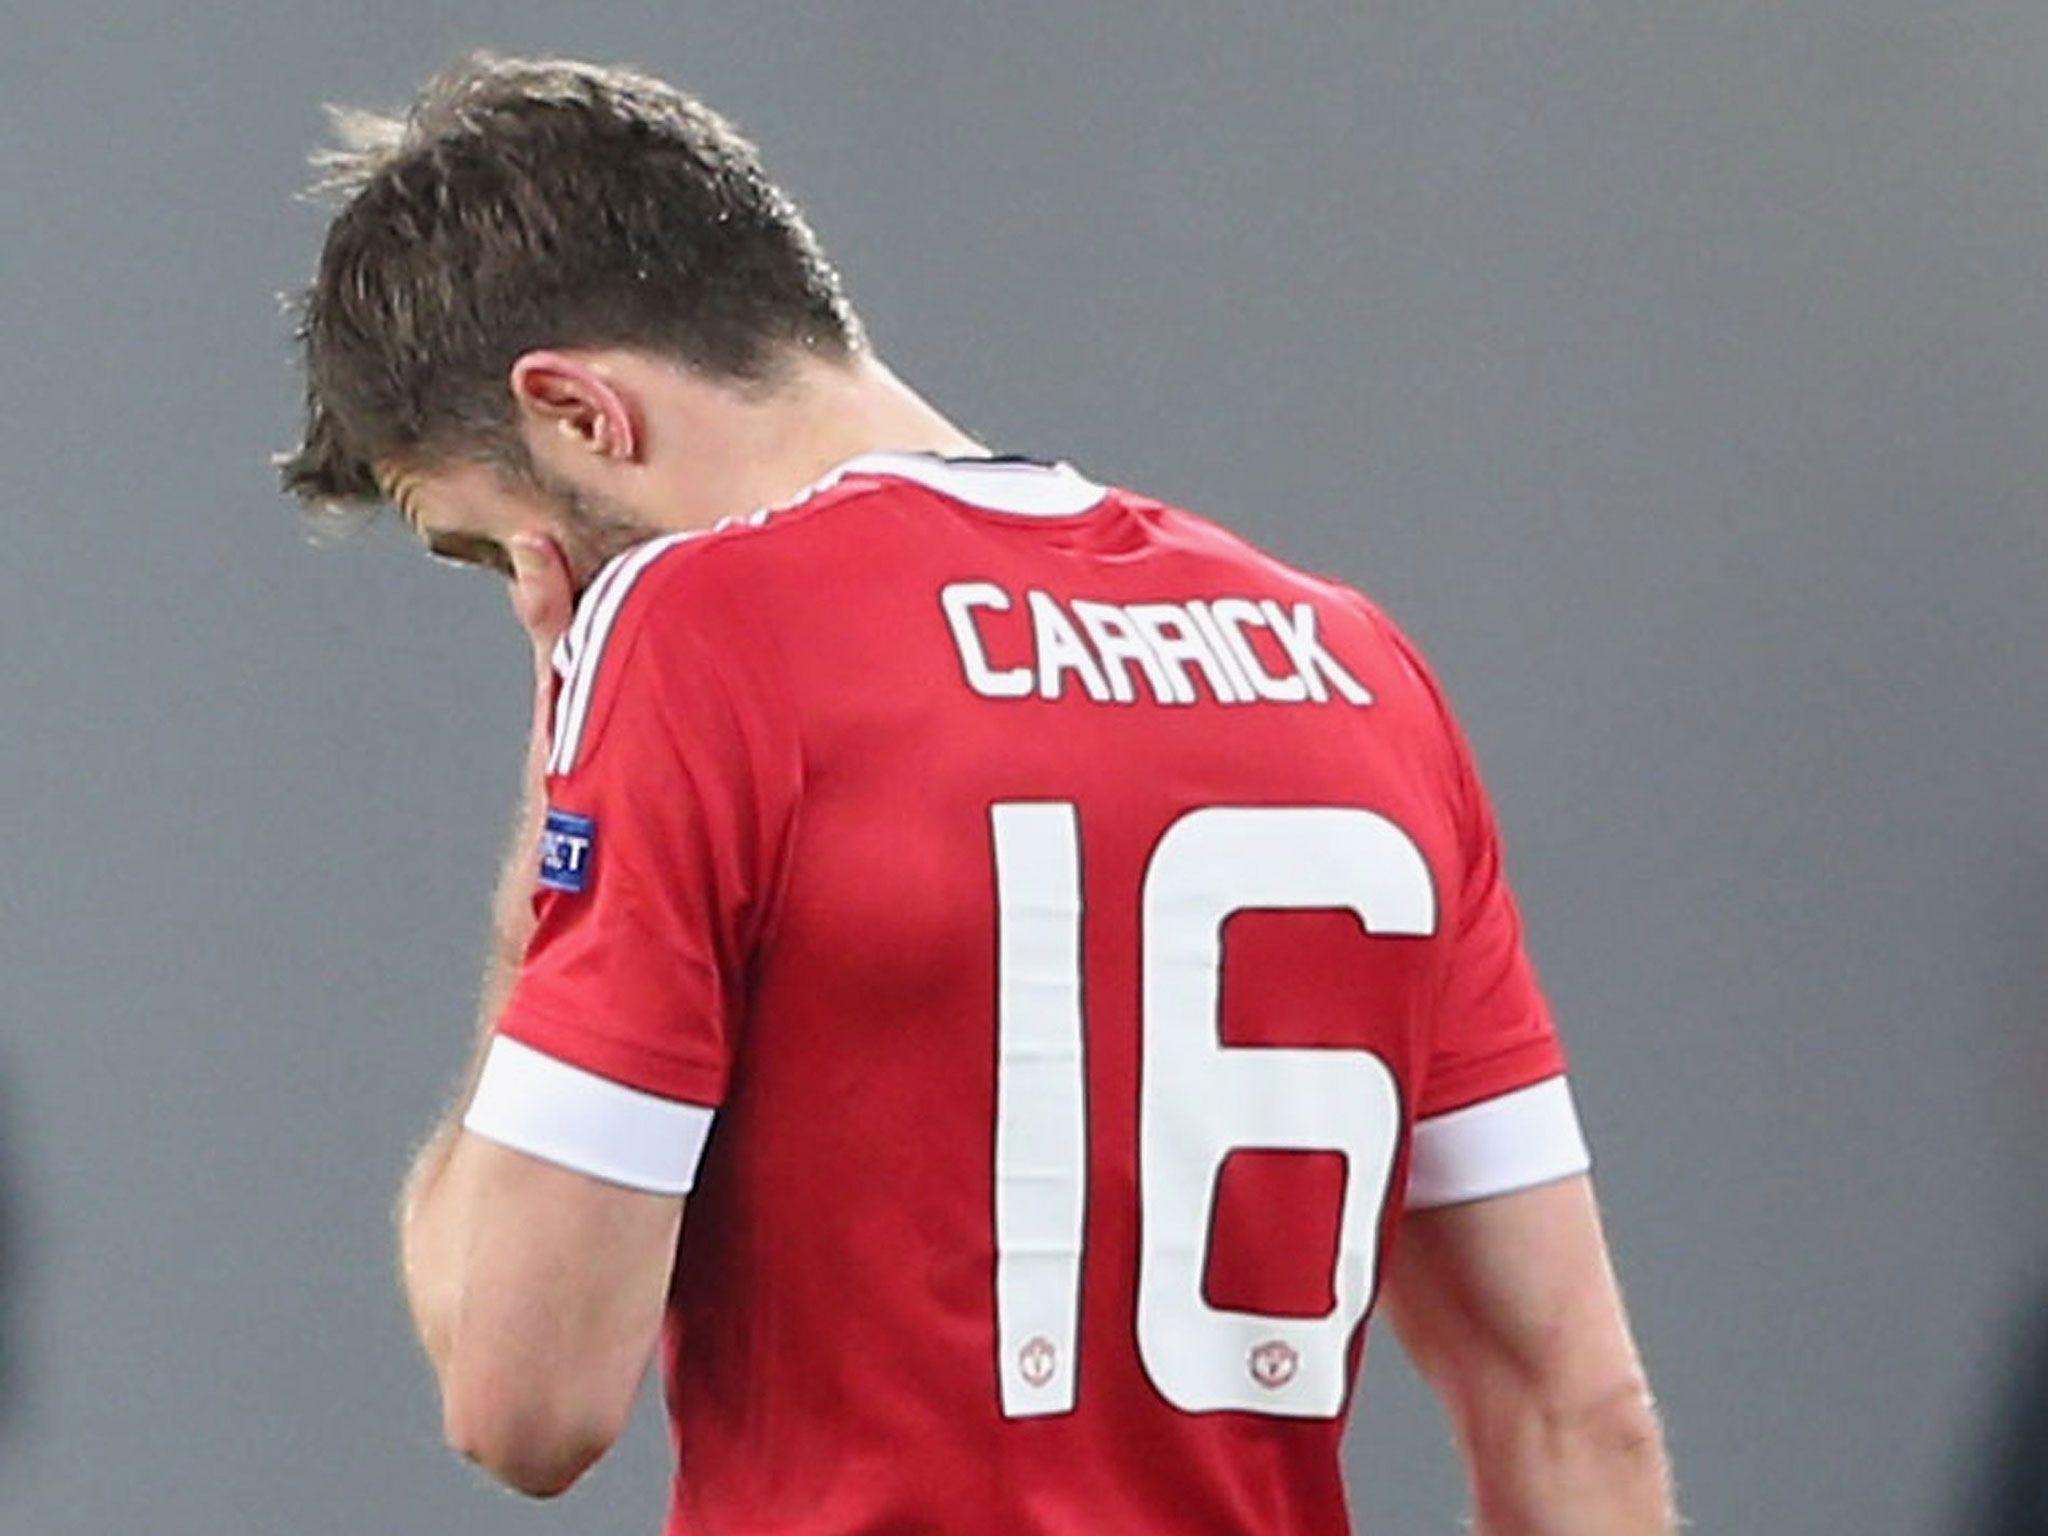 Manchester United's Michael Carrick misses train, gets mocked